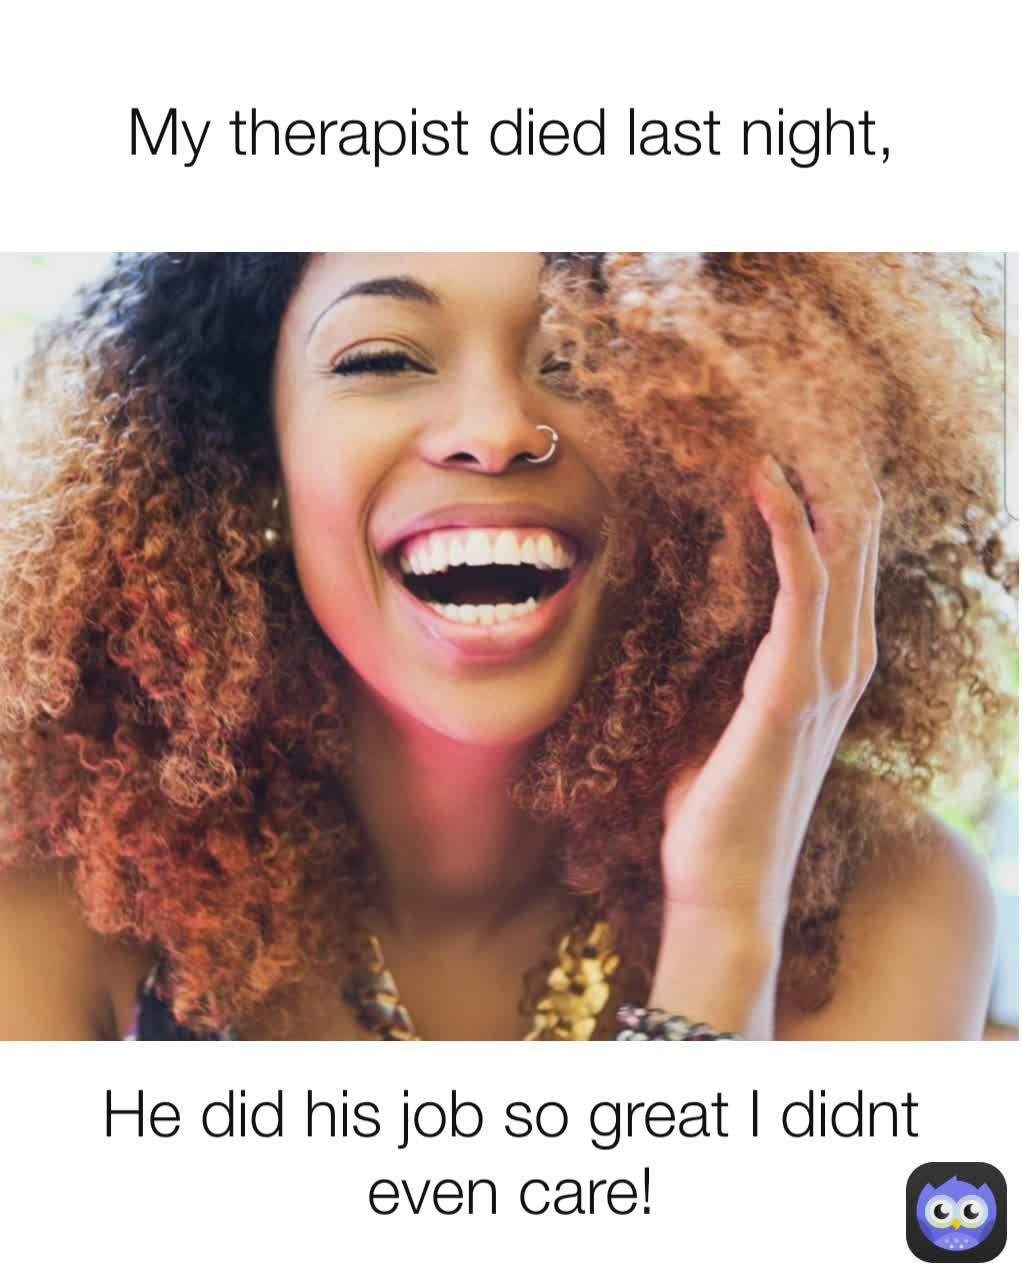 My therapist died last night, He did his job so great I didnt even care!